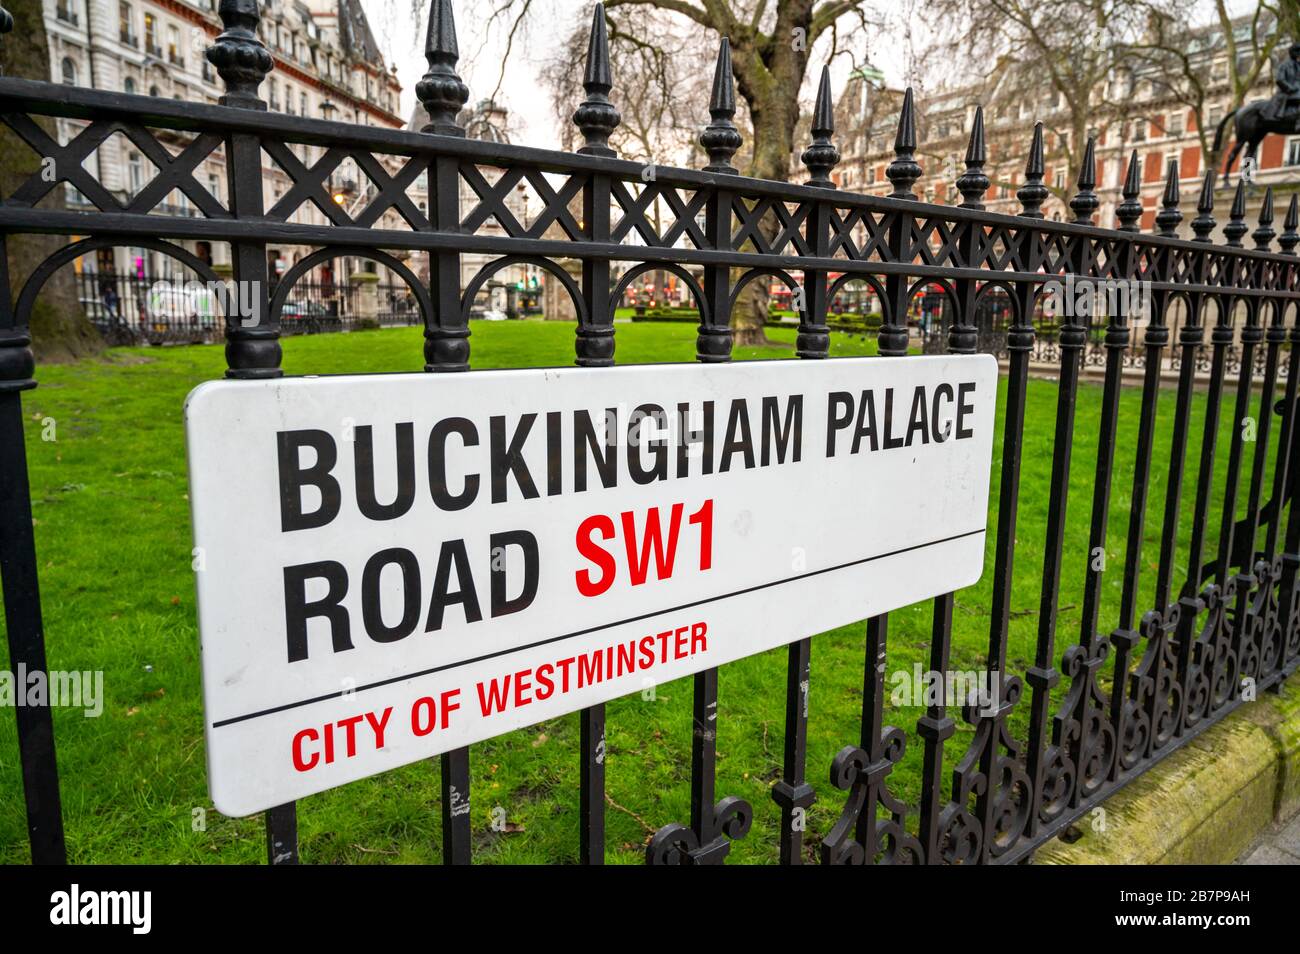 Buckingham Palace Road SW1 street sign on wrought iron fence by Grosvenor Gardens and Victoria train station, London, England. Stock Photo